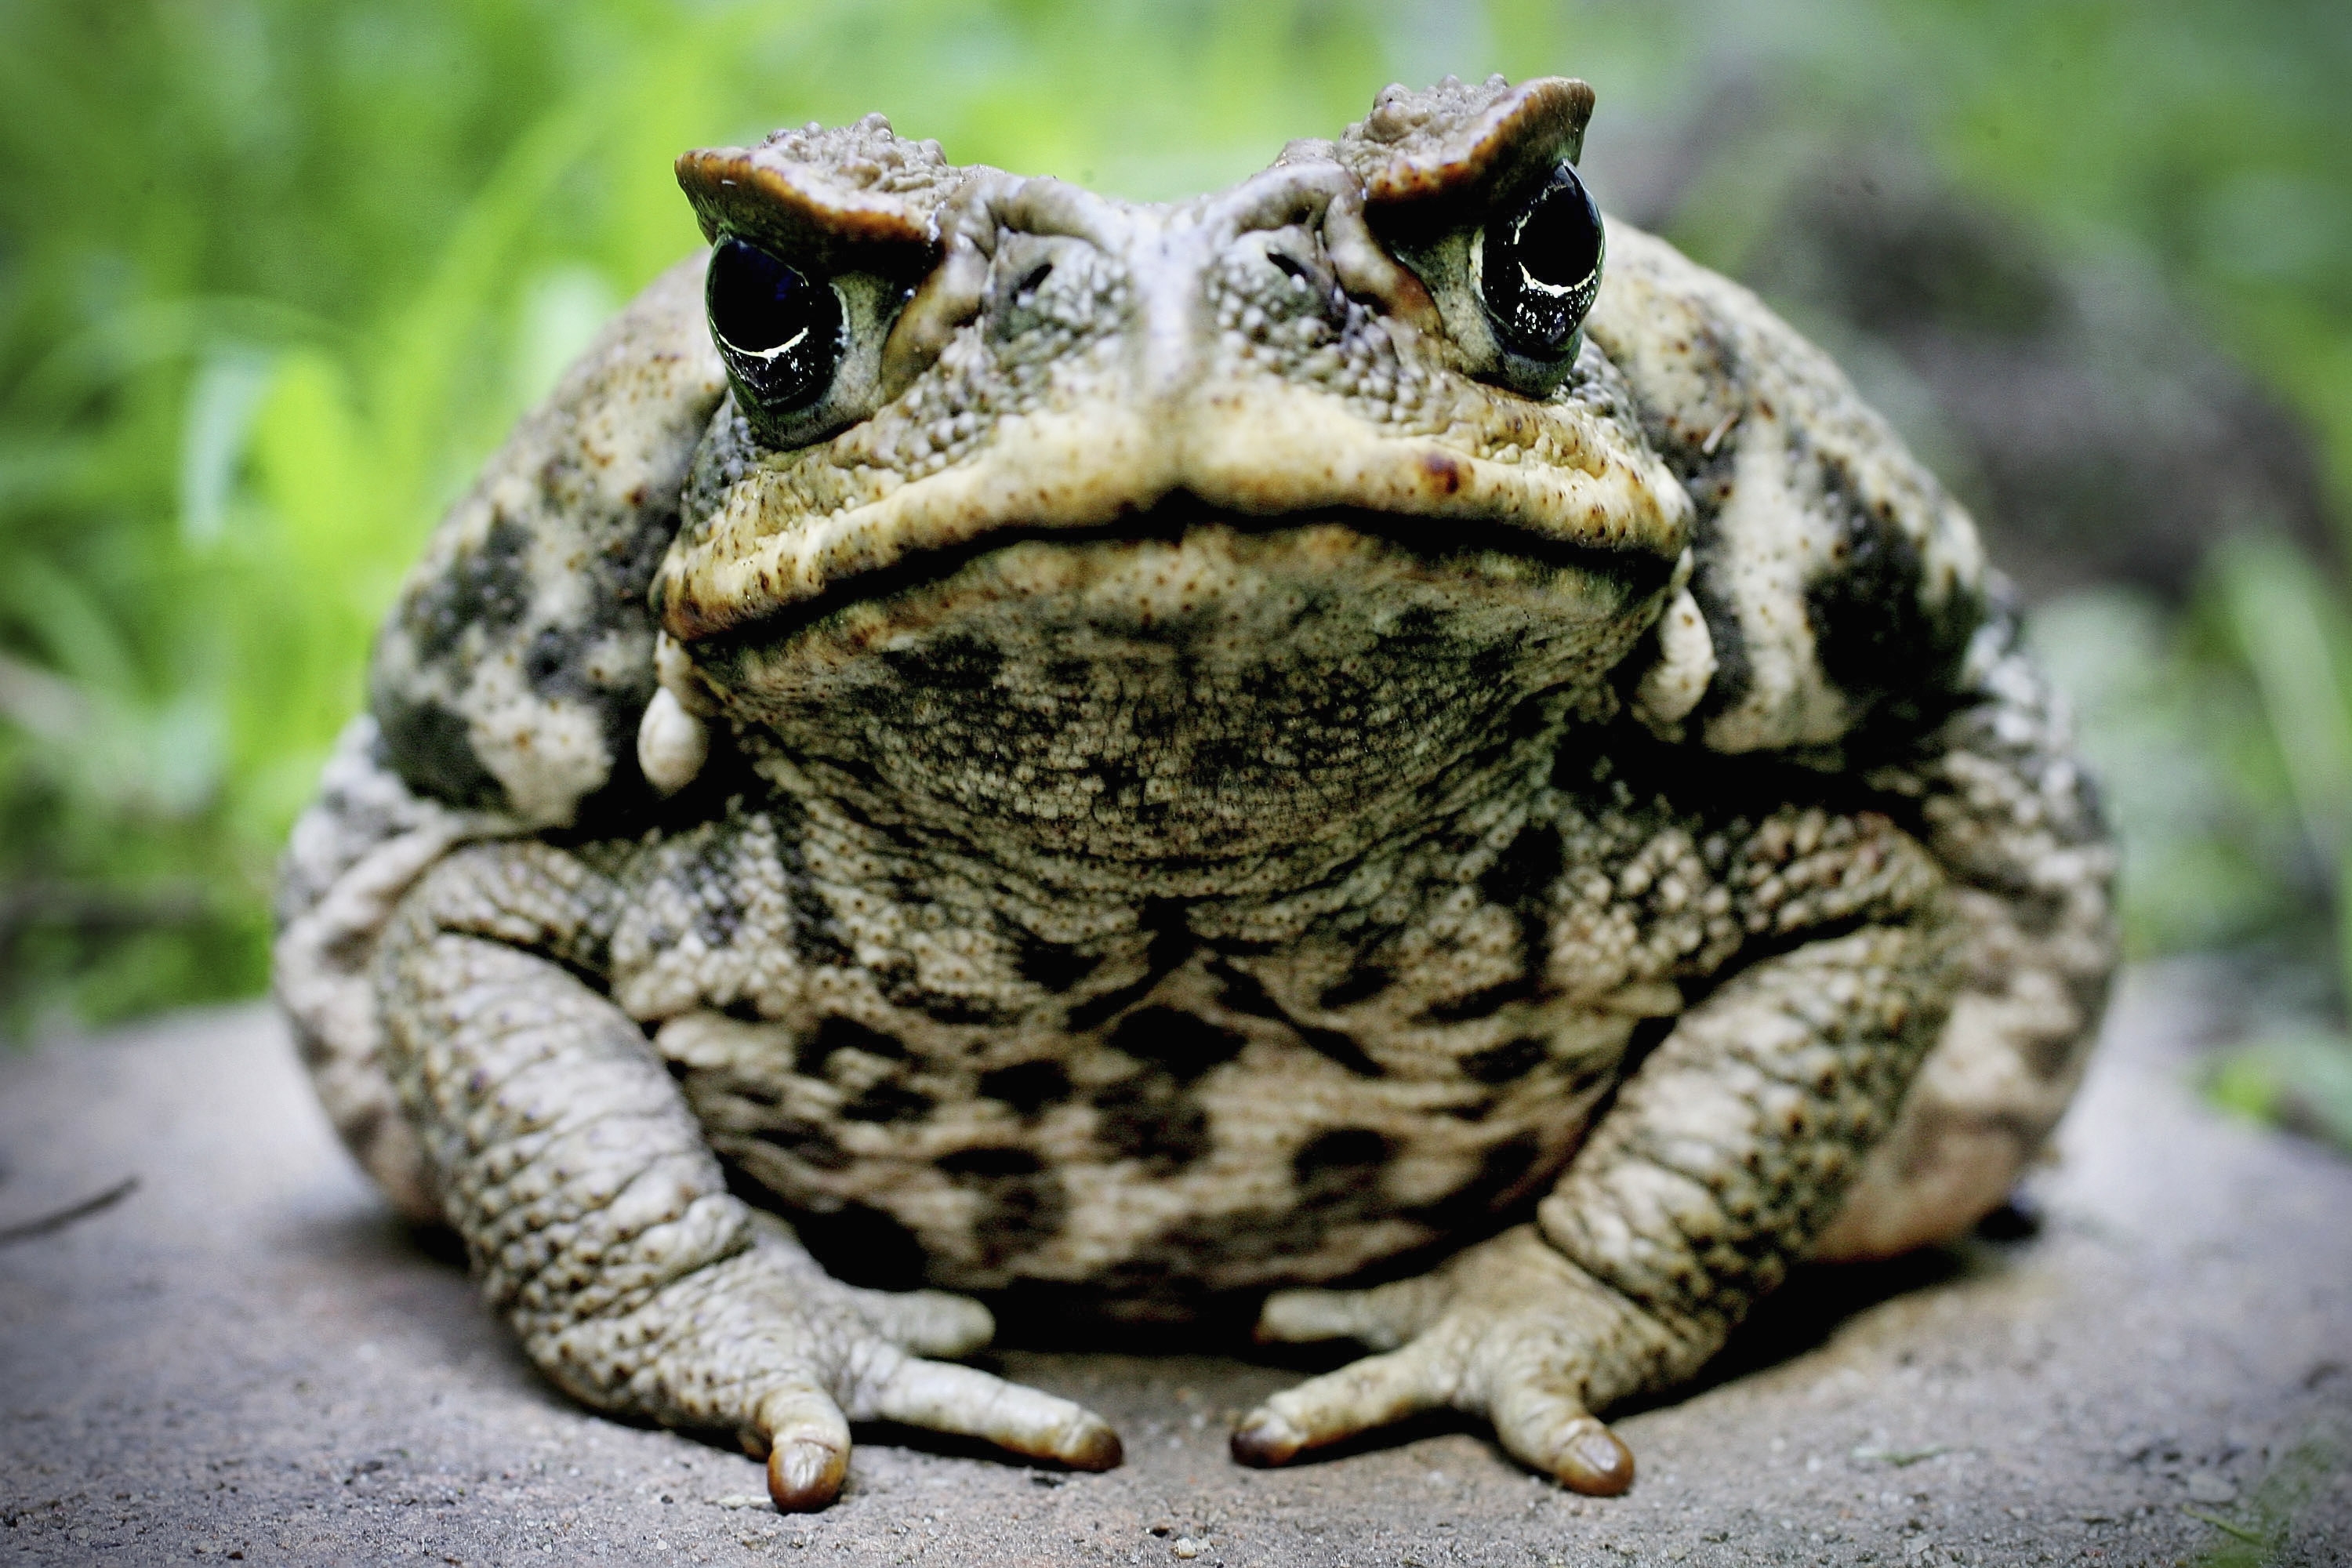 Cane Toad #3